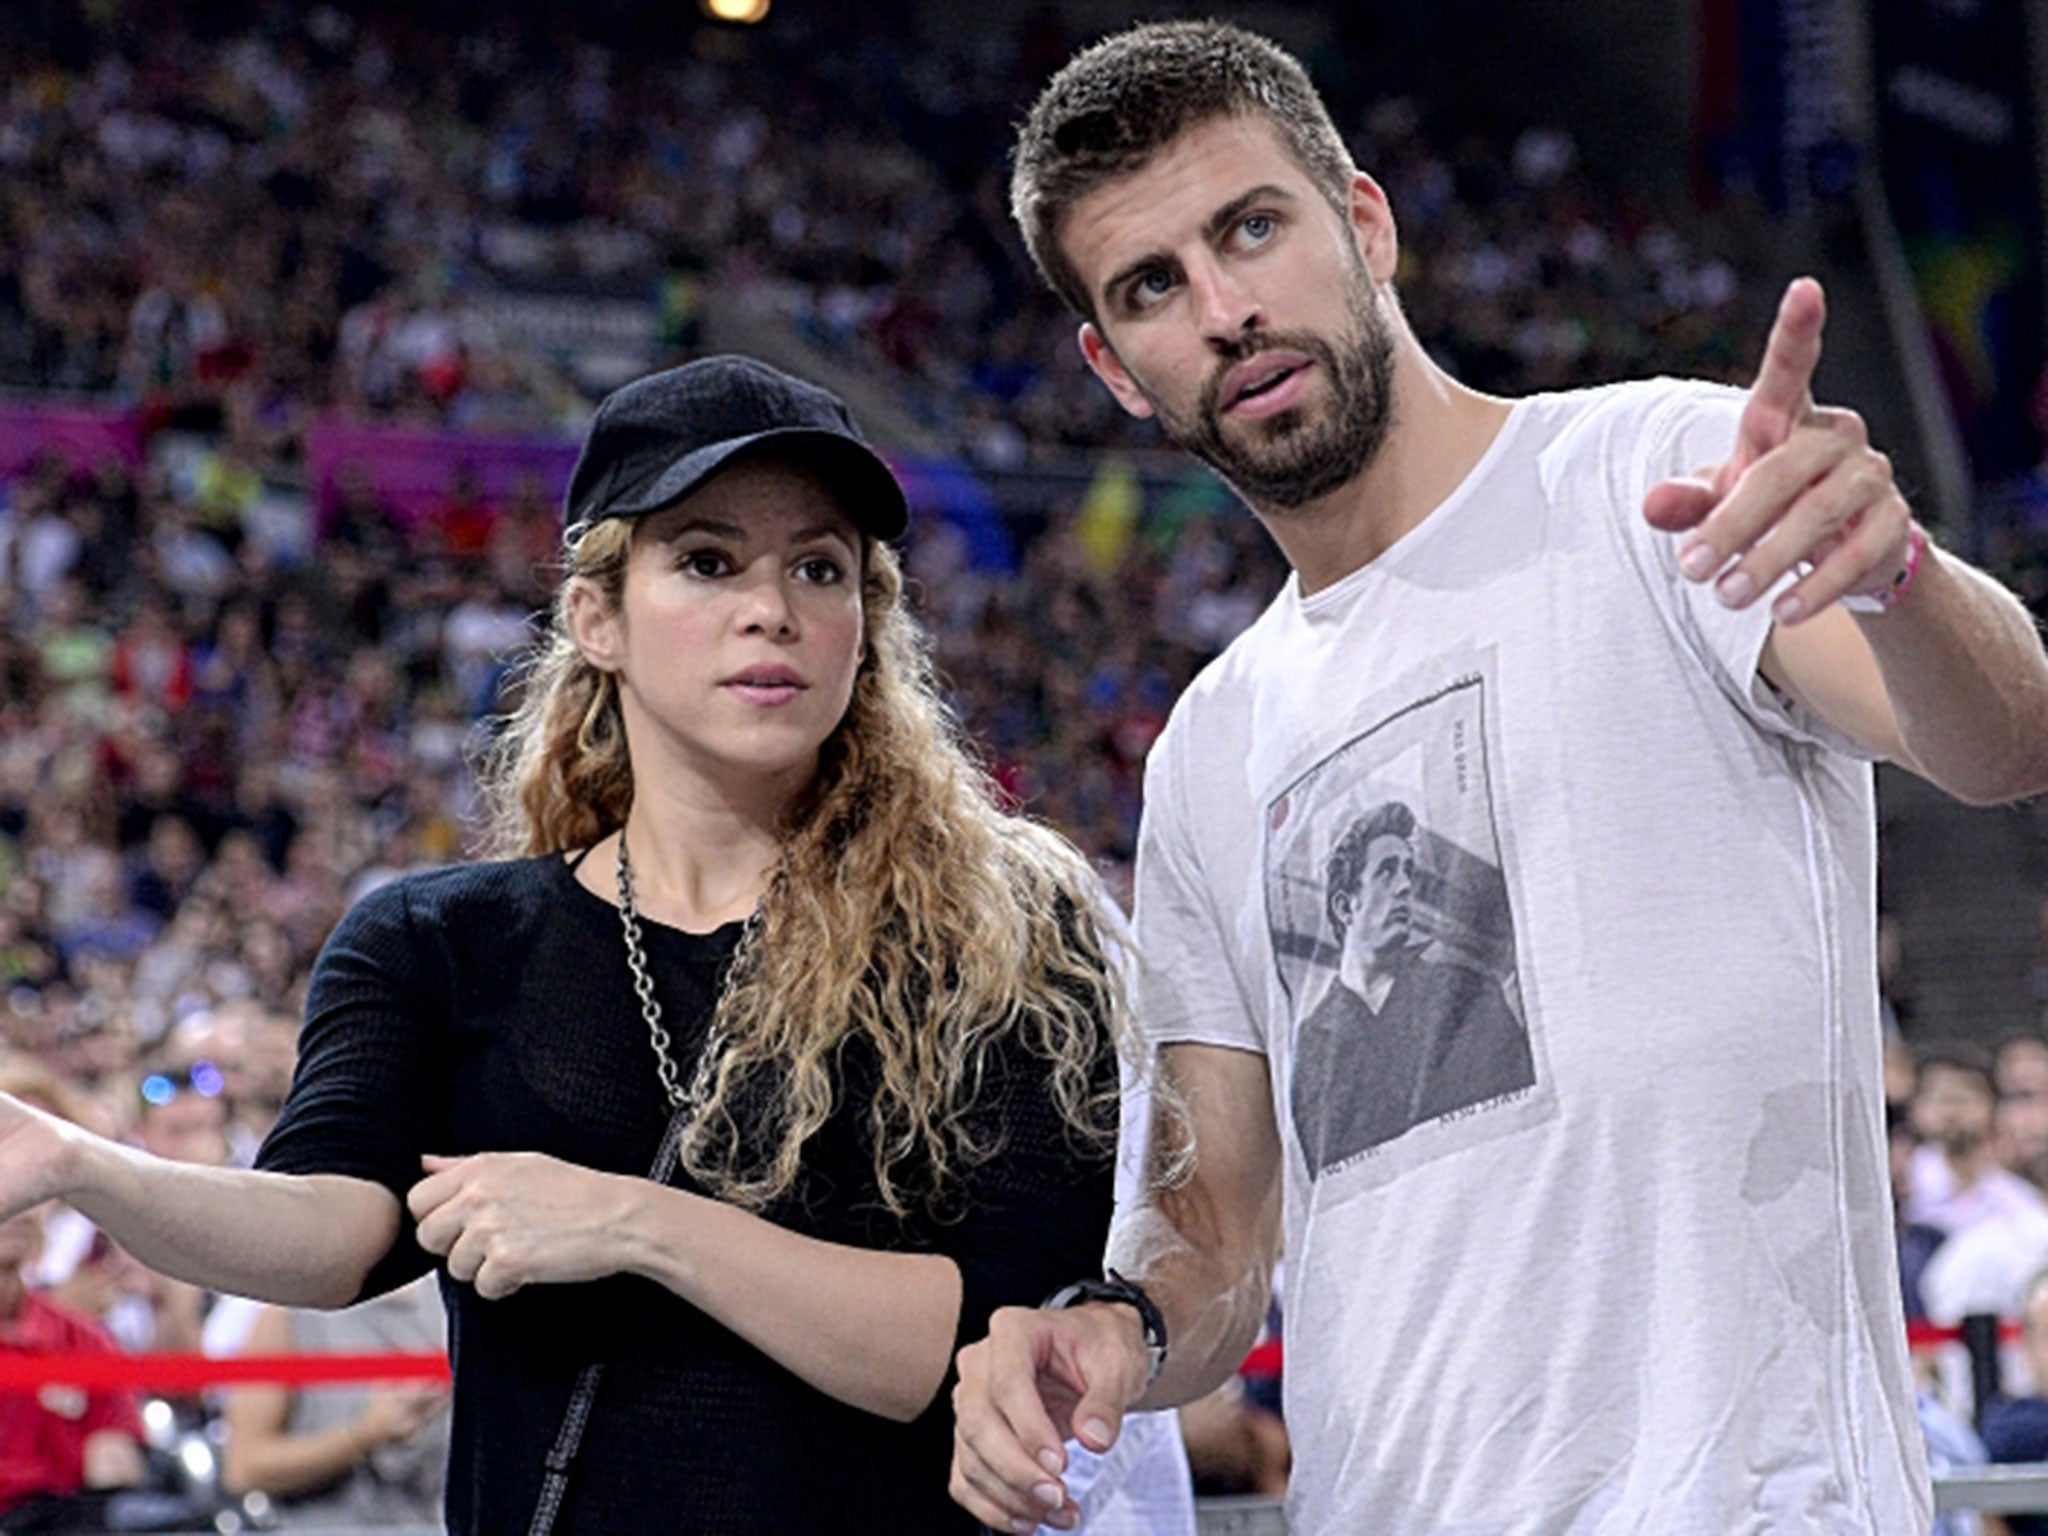 Gerard Pique and Shakira being blackmailed over sex tape The Independent The Independent image pic